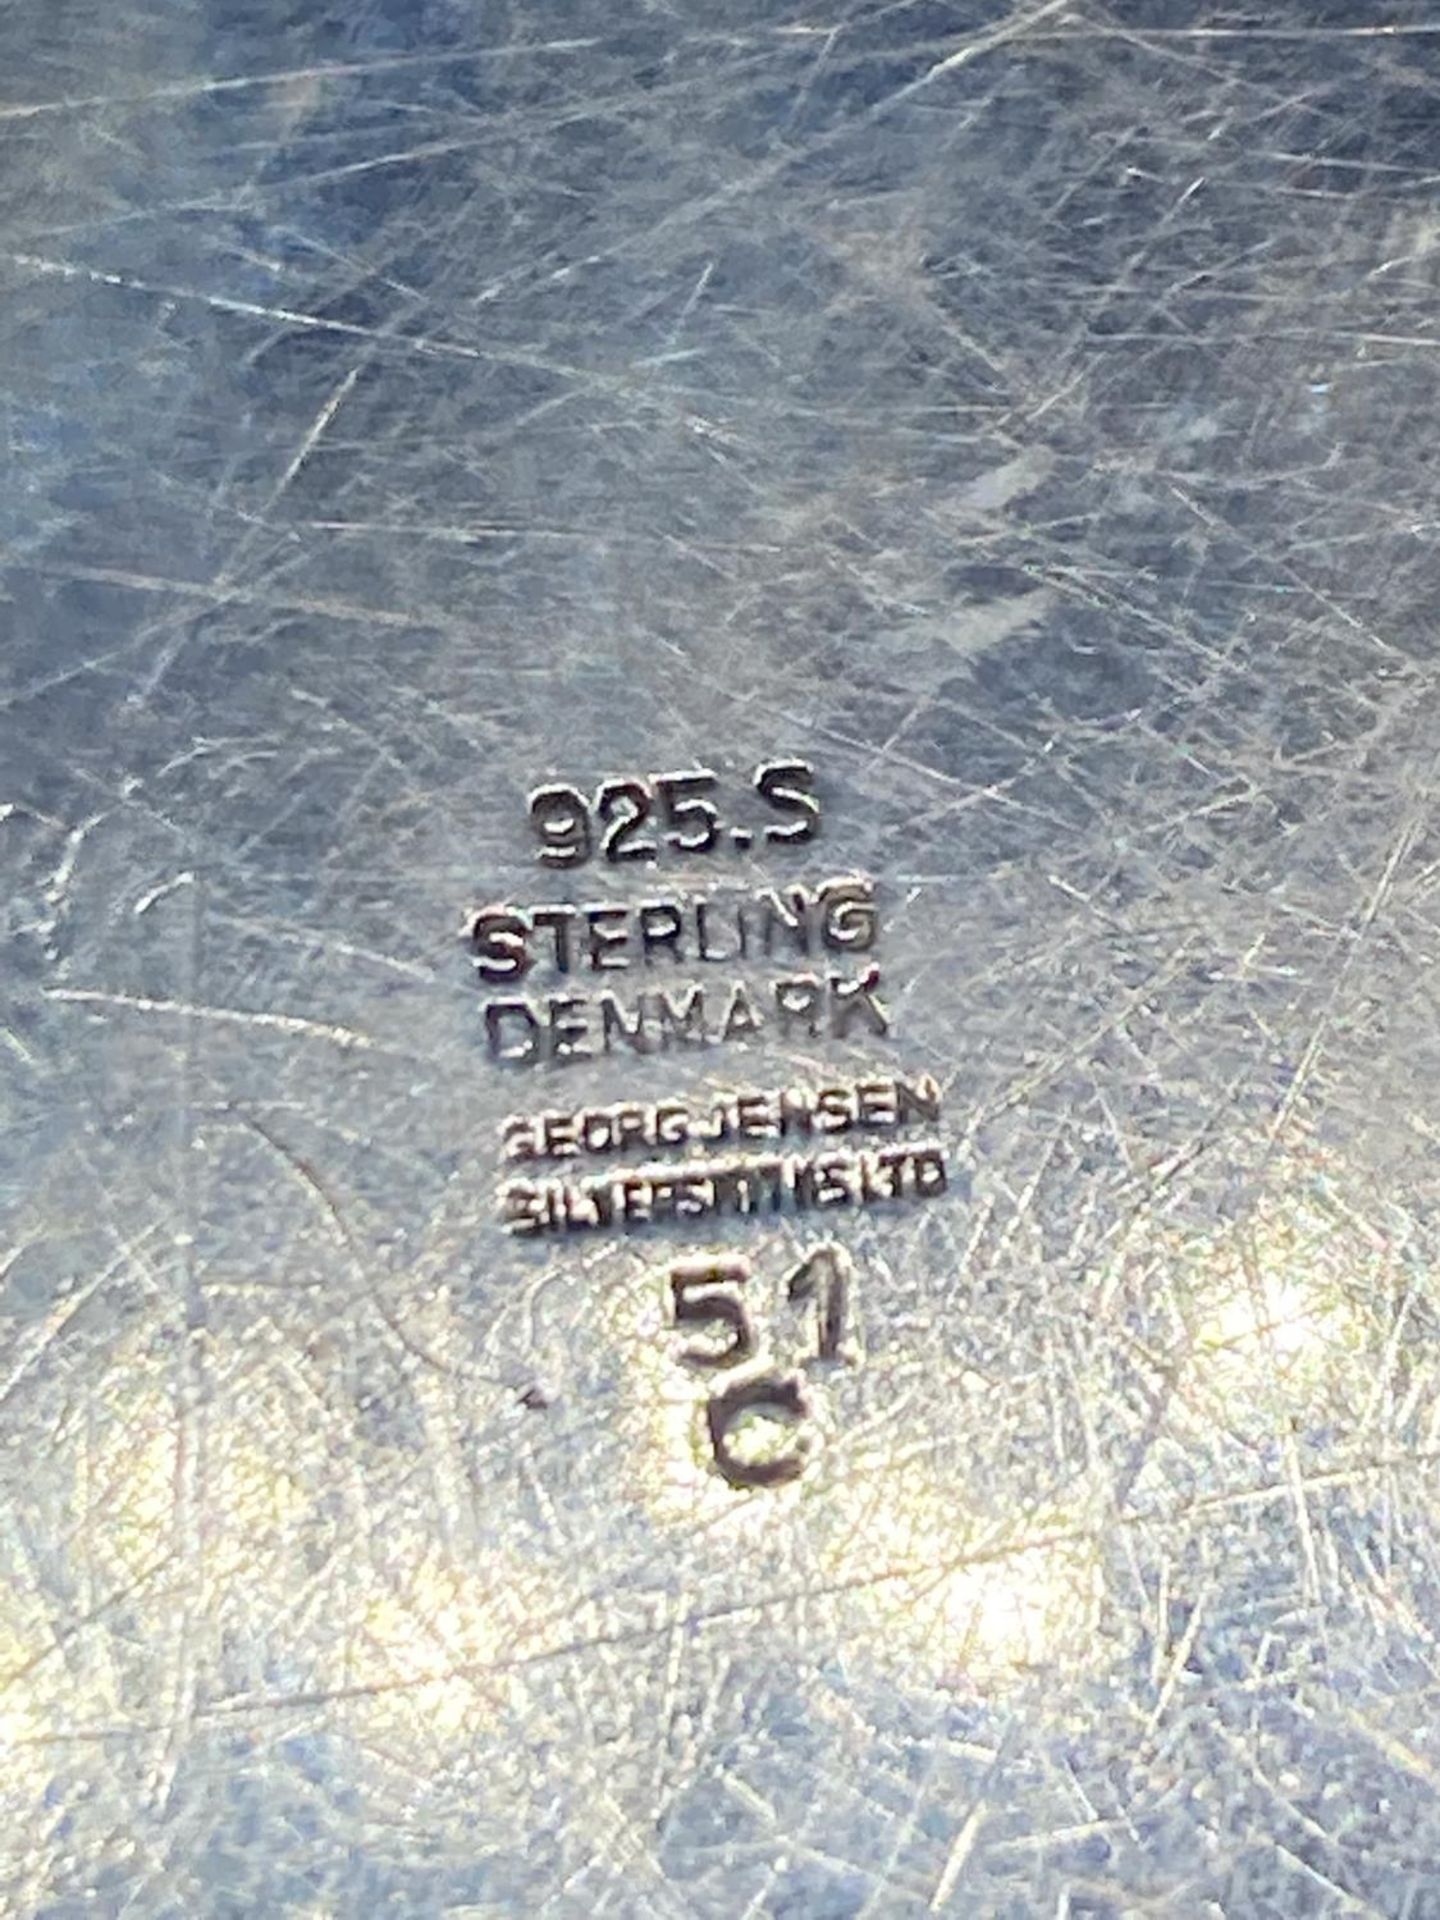 A GEORG JENSON SILVER COASTER - Image 3 of 3